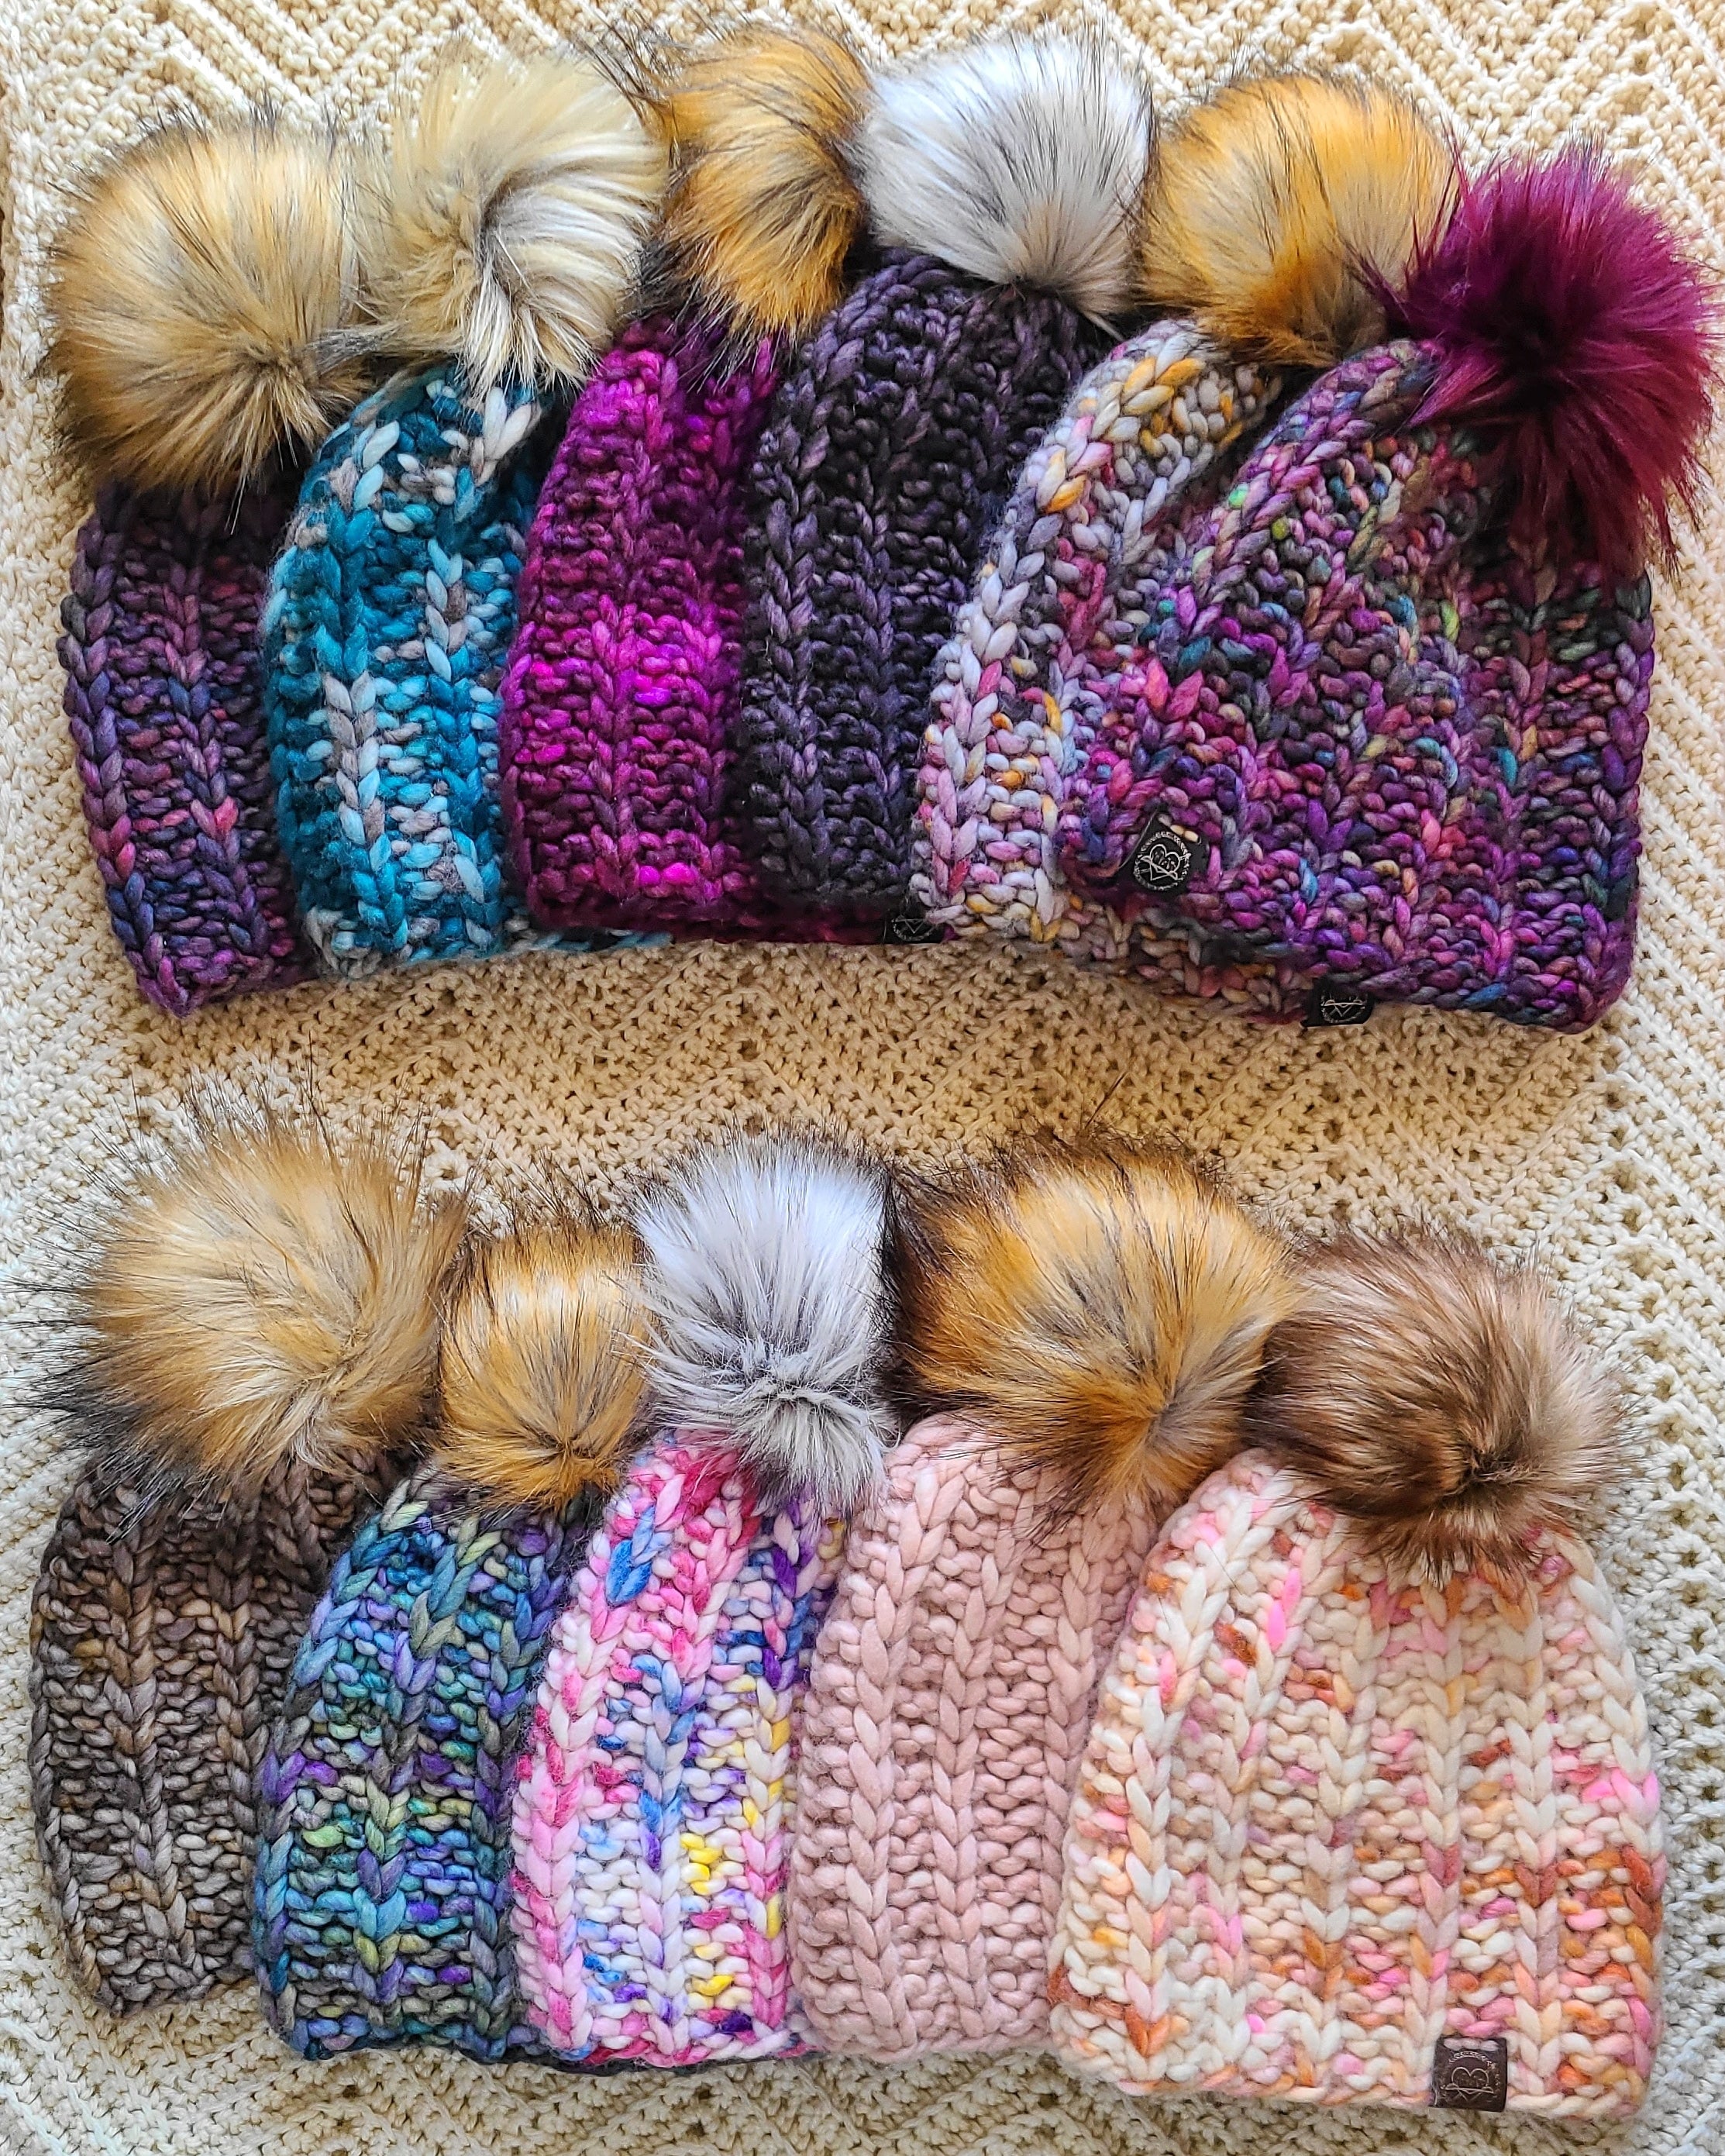 Knitted hats